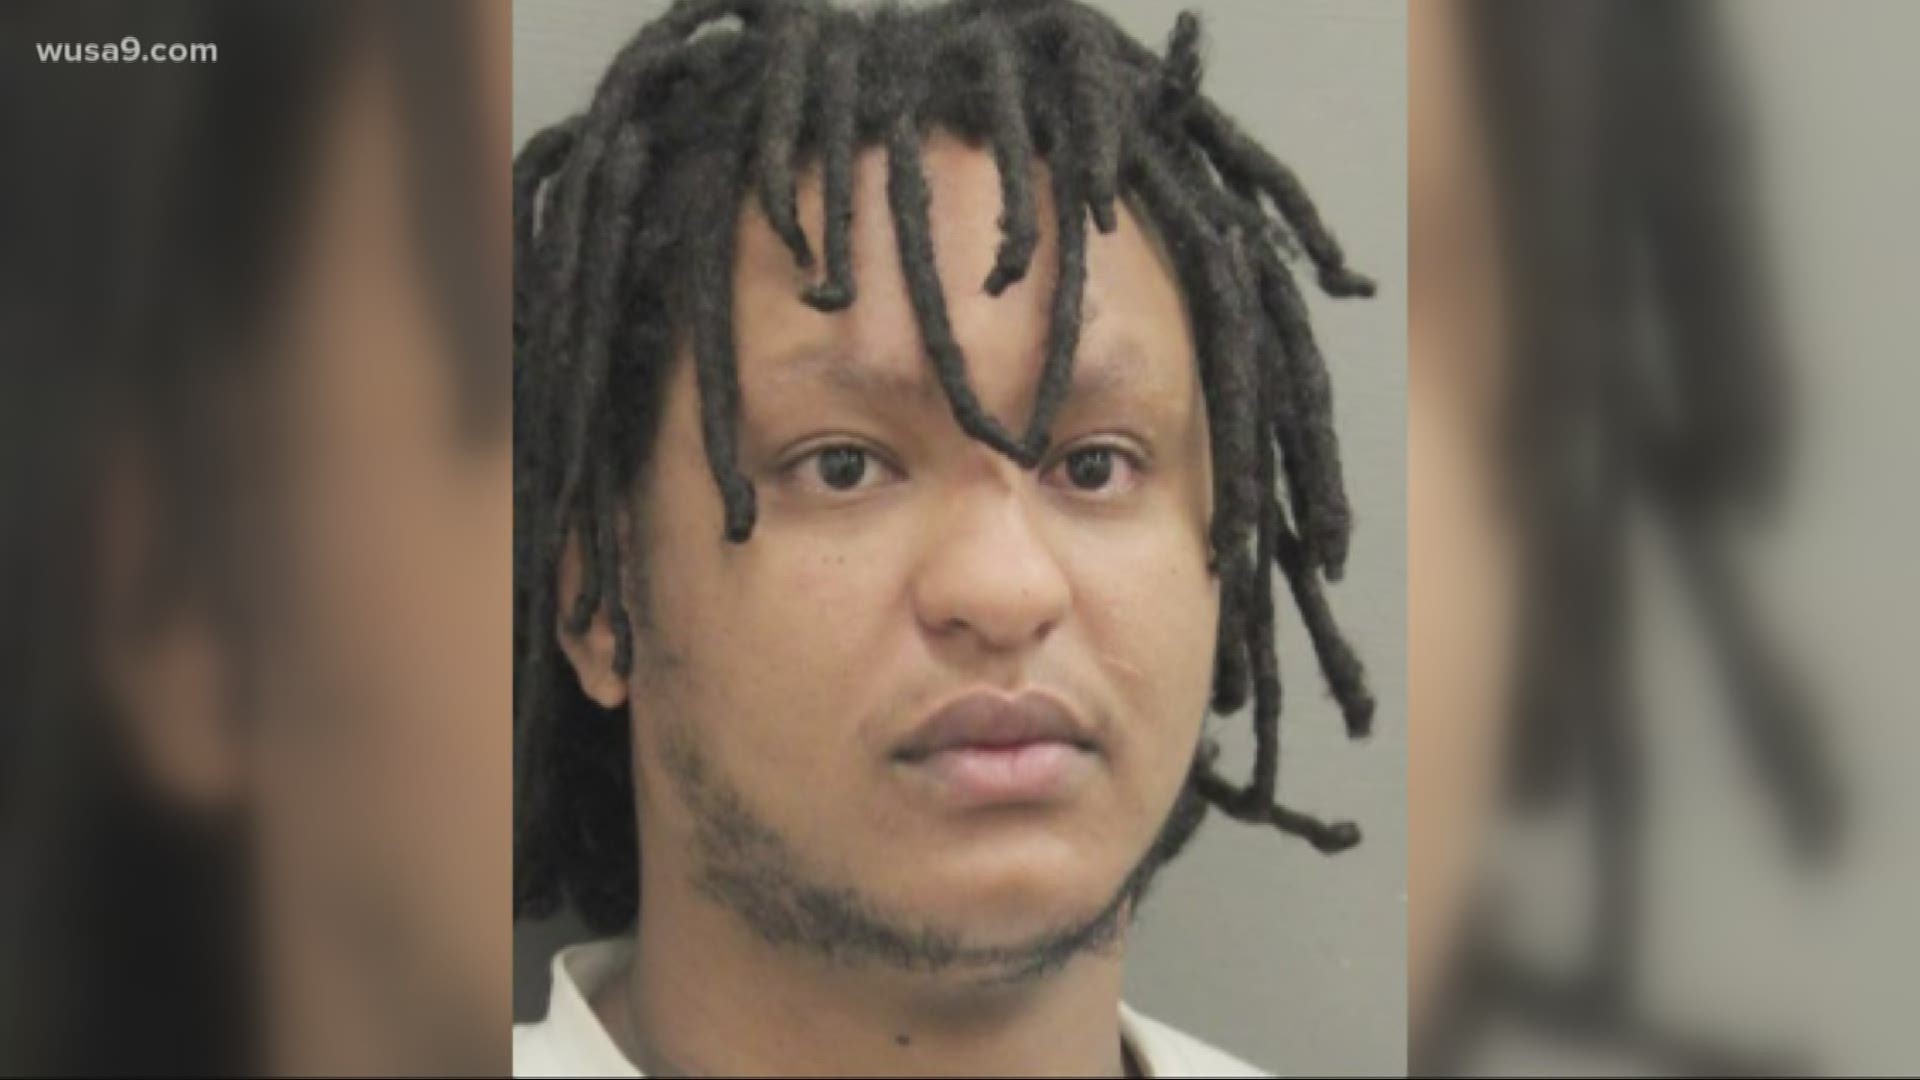 A man has been extradited from Ethiopia and charged with murdering two people in Fairfax County. Yohannes Nessibu is facing multiple charges in connection to the 2016 deaths of Henok Yohannes and Kedest Simeneh. Both victims were just 22.